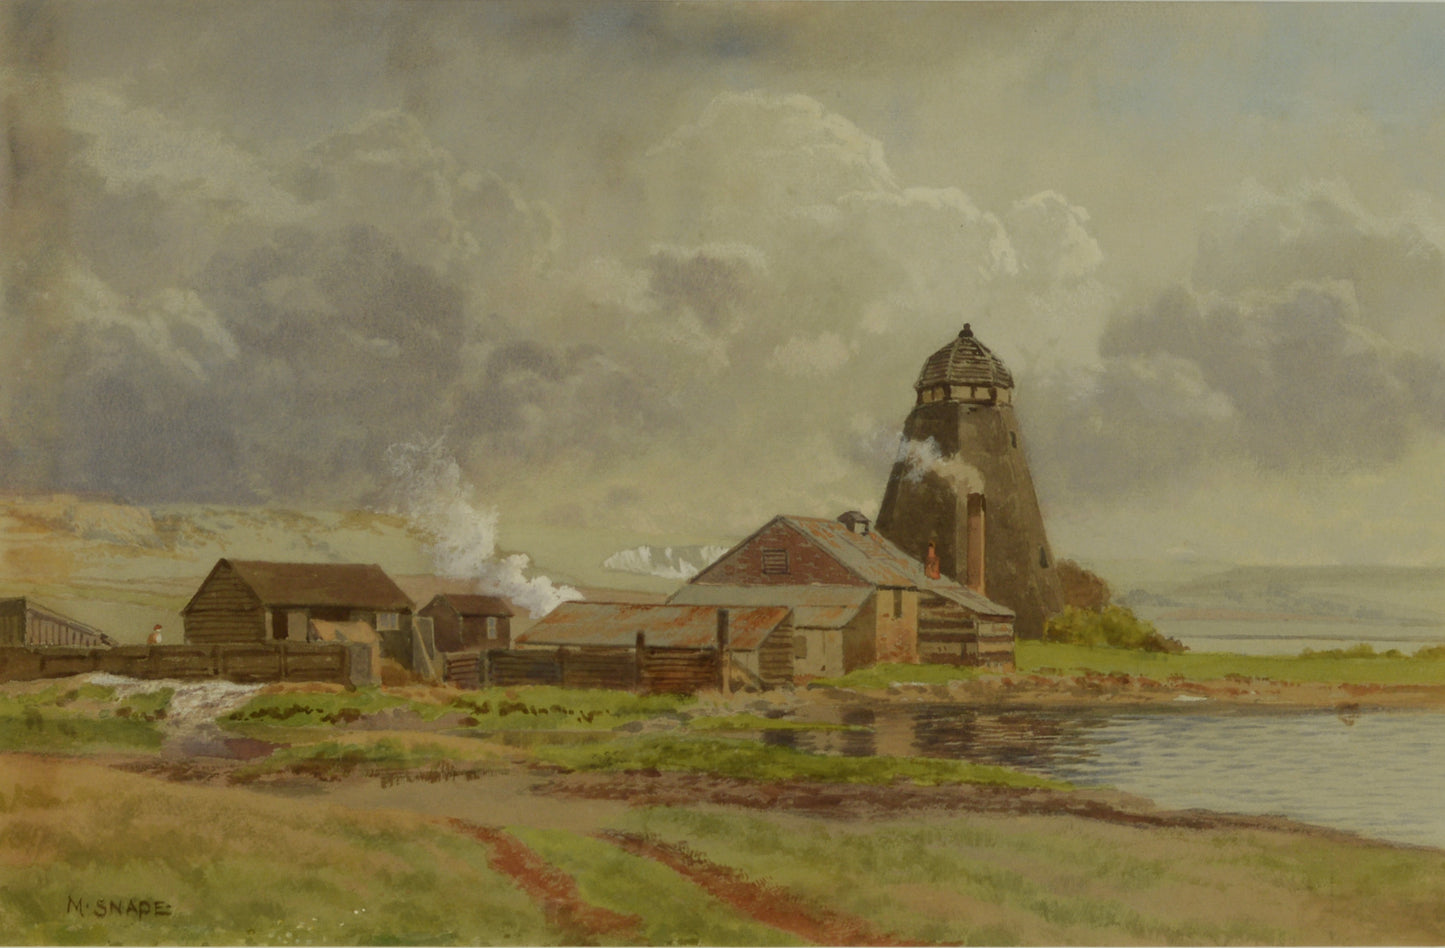 Watercolour of Wicor Mill, Portchester by Martin Snape